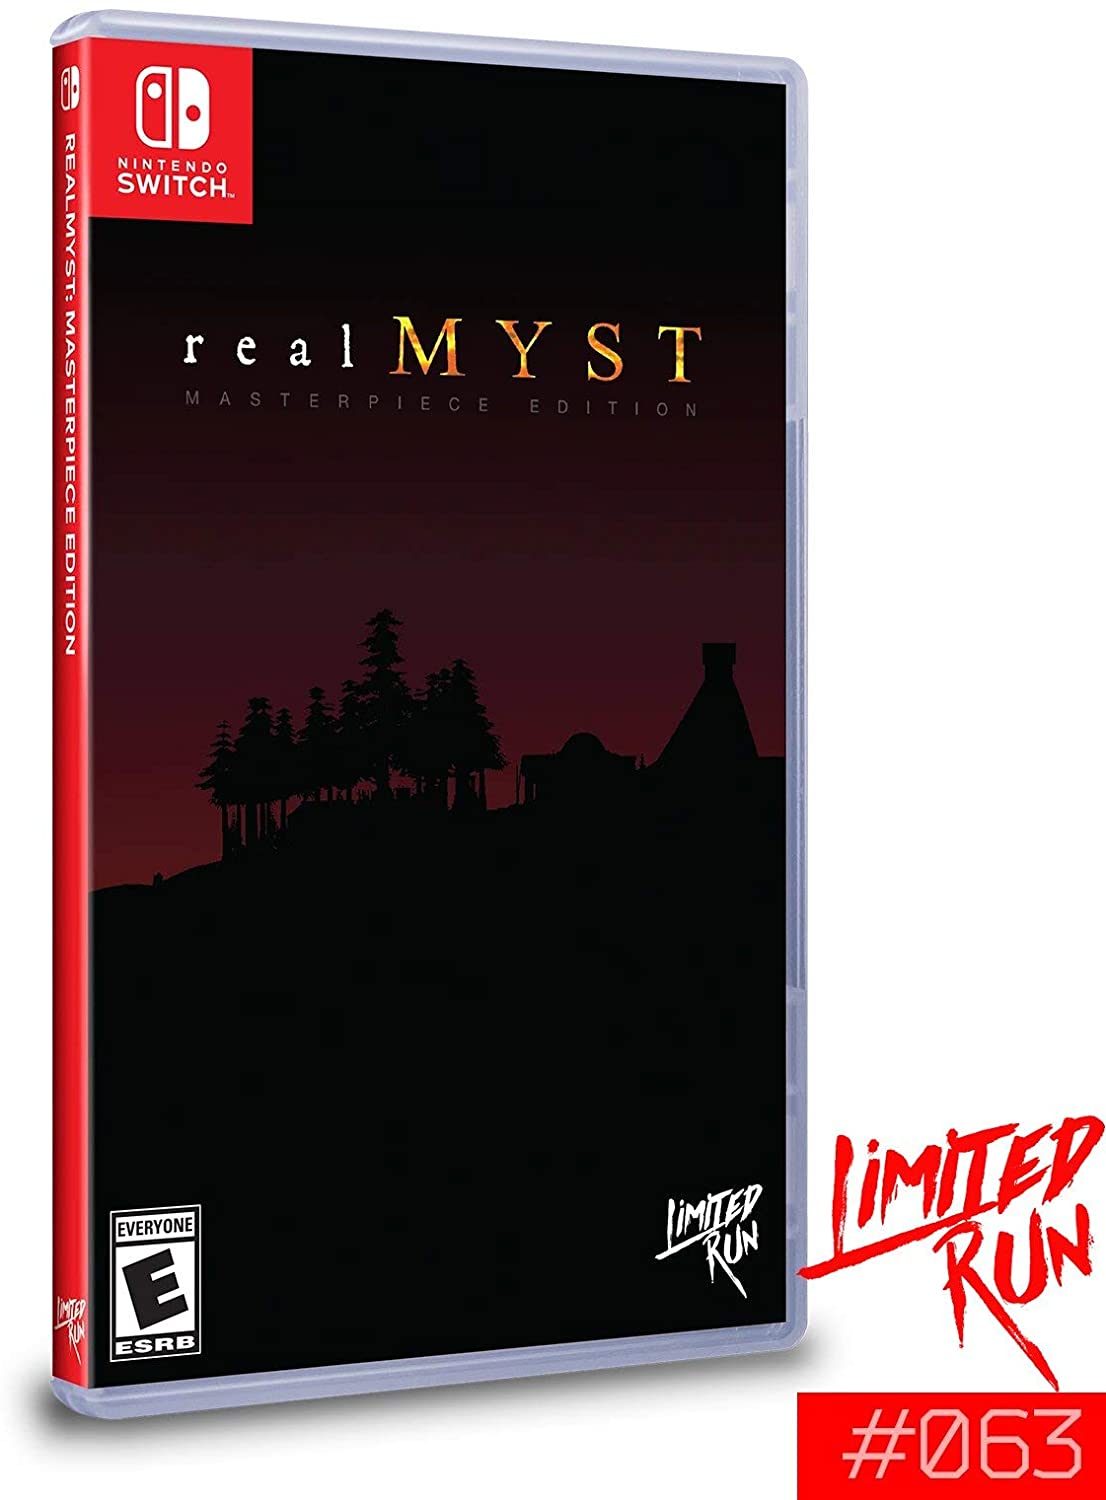 Real Myst Masterpiece Edition (Limited Run)